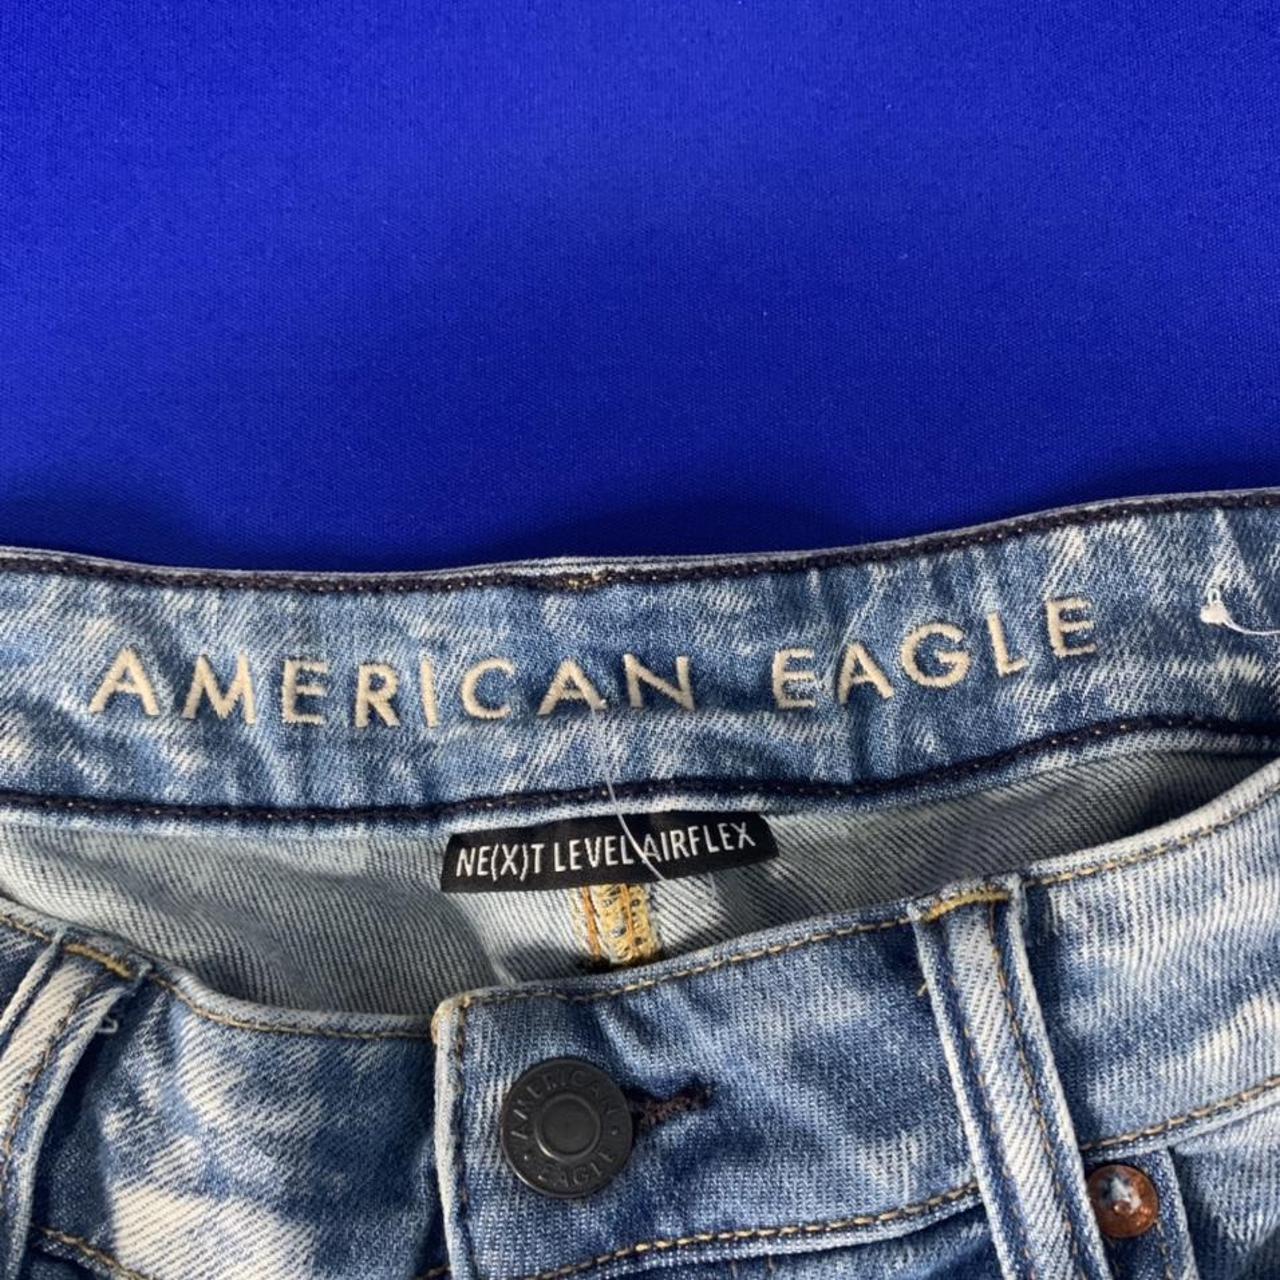 American Eagle Outfitters Next Level Airflex Ripped... - Depop